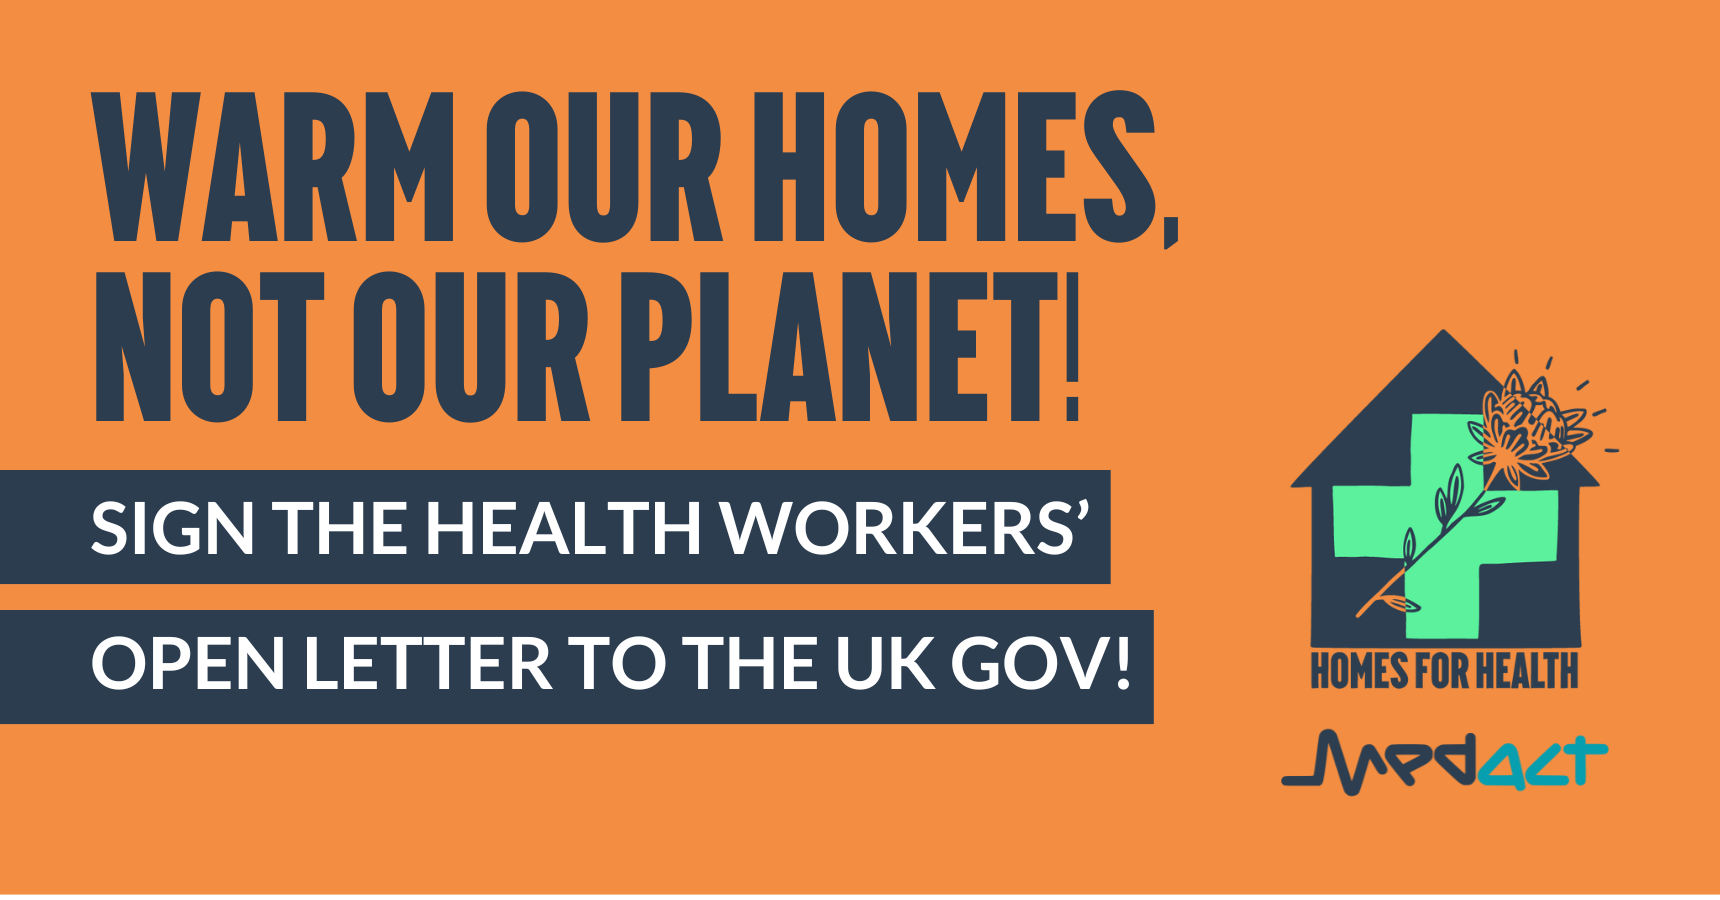 Warm Our Homes, Not Our Planet! Sign the health workers' open letter to the UK gov! -- Homes for Health, Medact